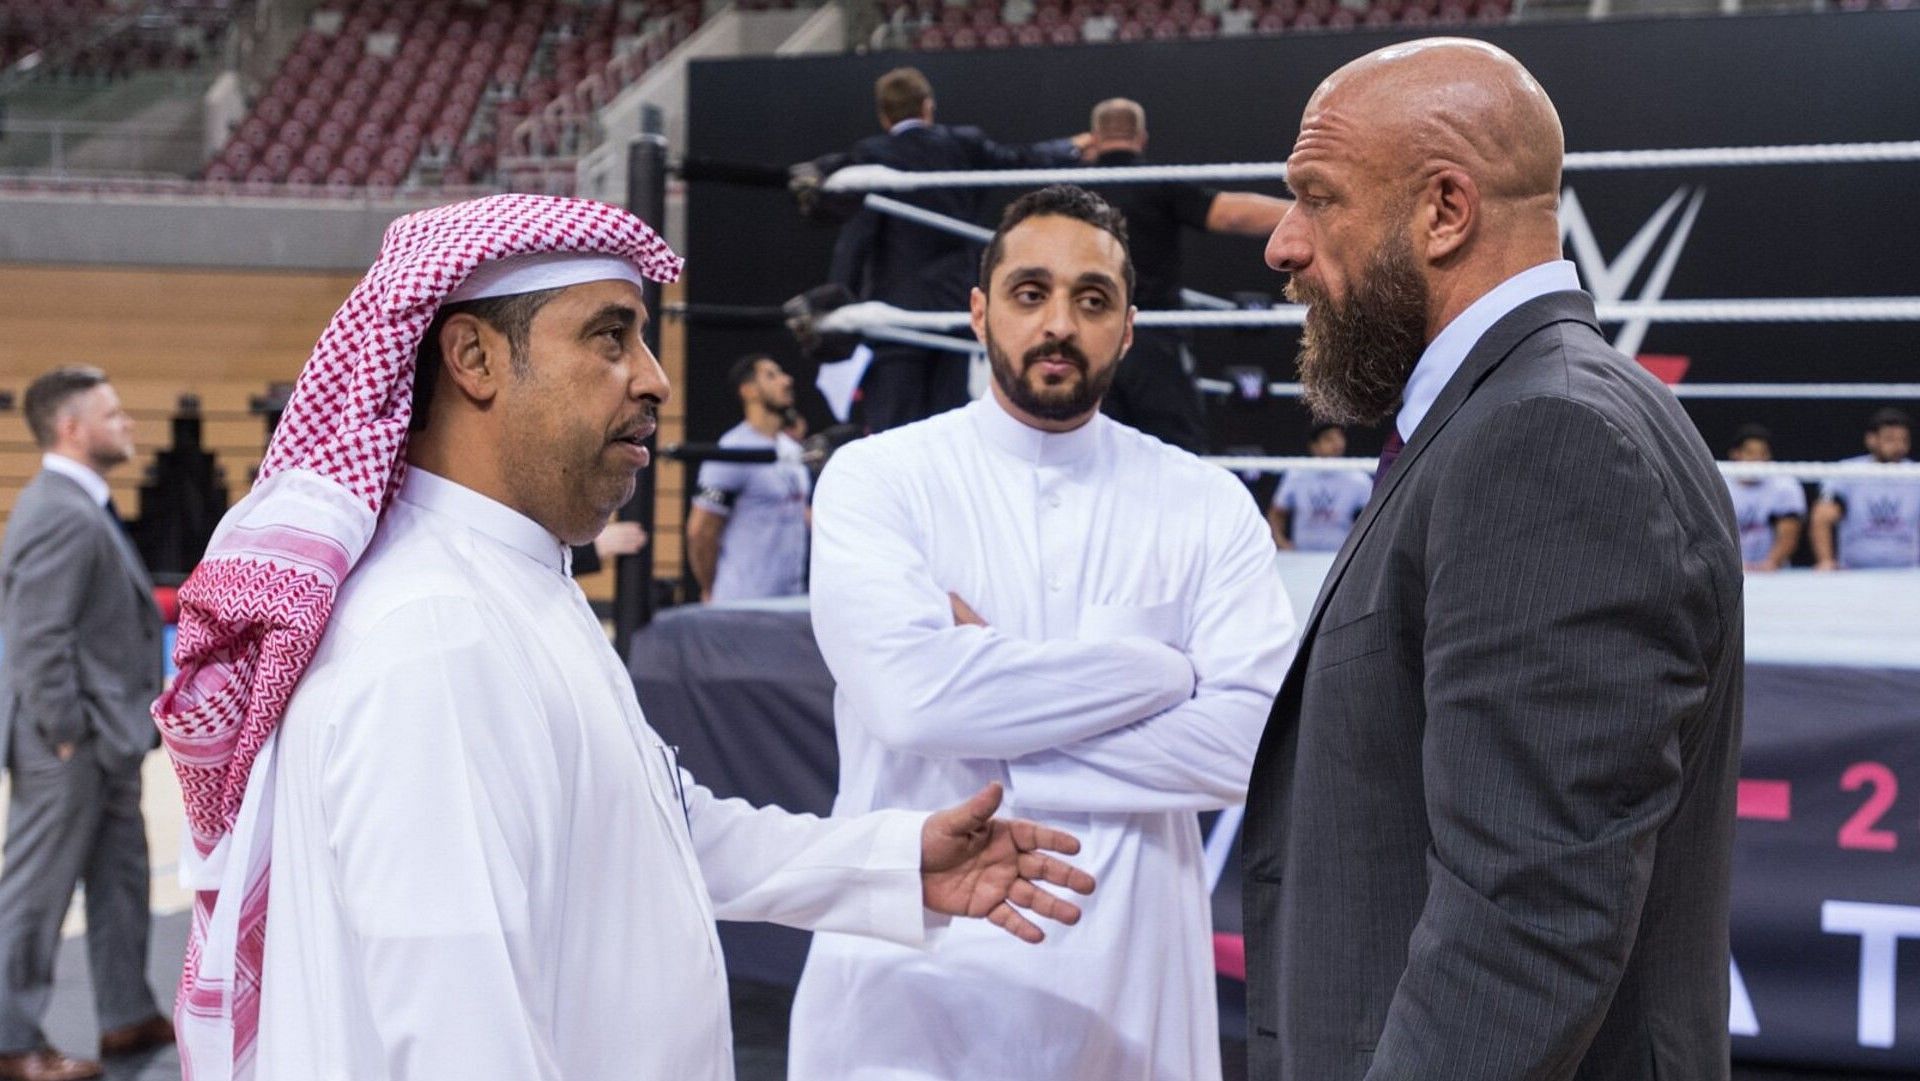 Chief Content Officer Triple H speaks to local officials in Jeddah, Saudi Arabia during WWE tryouts